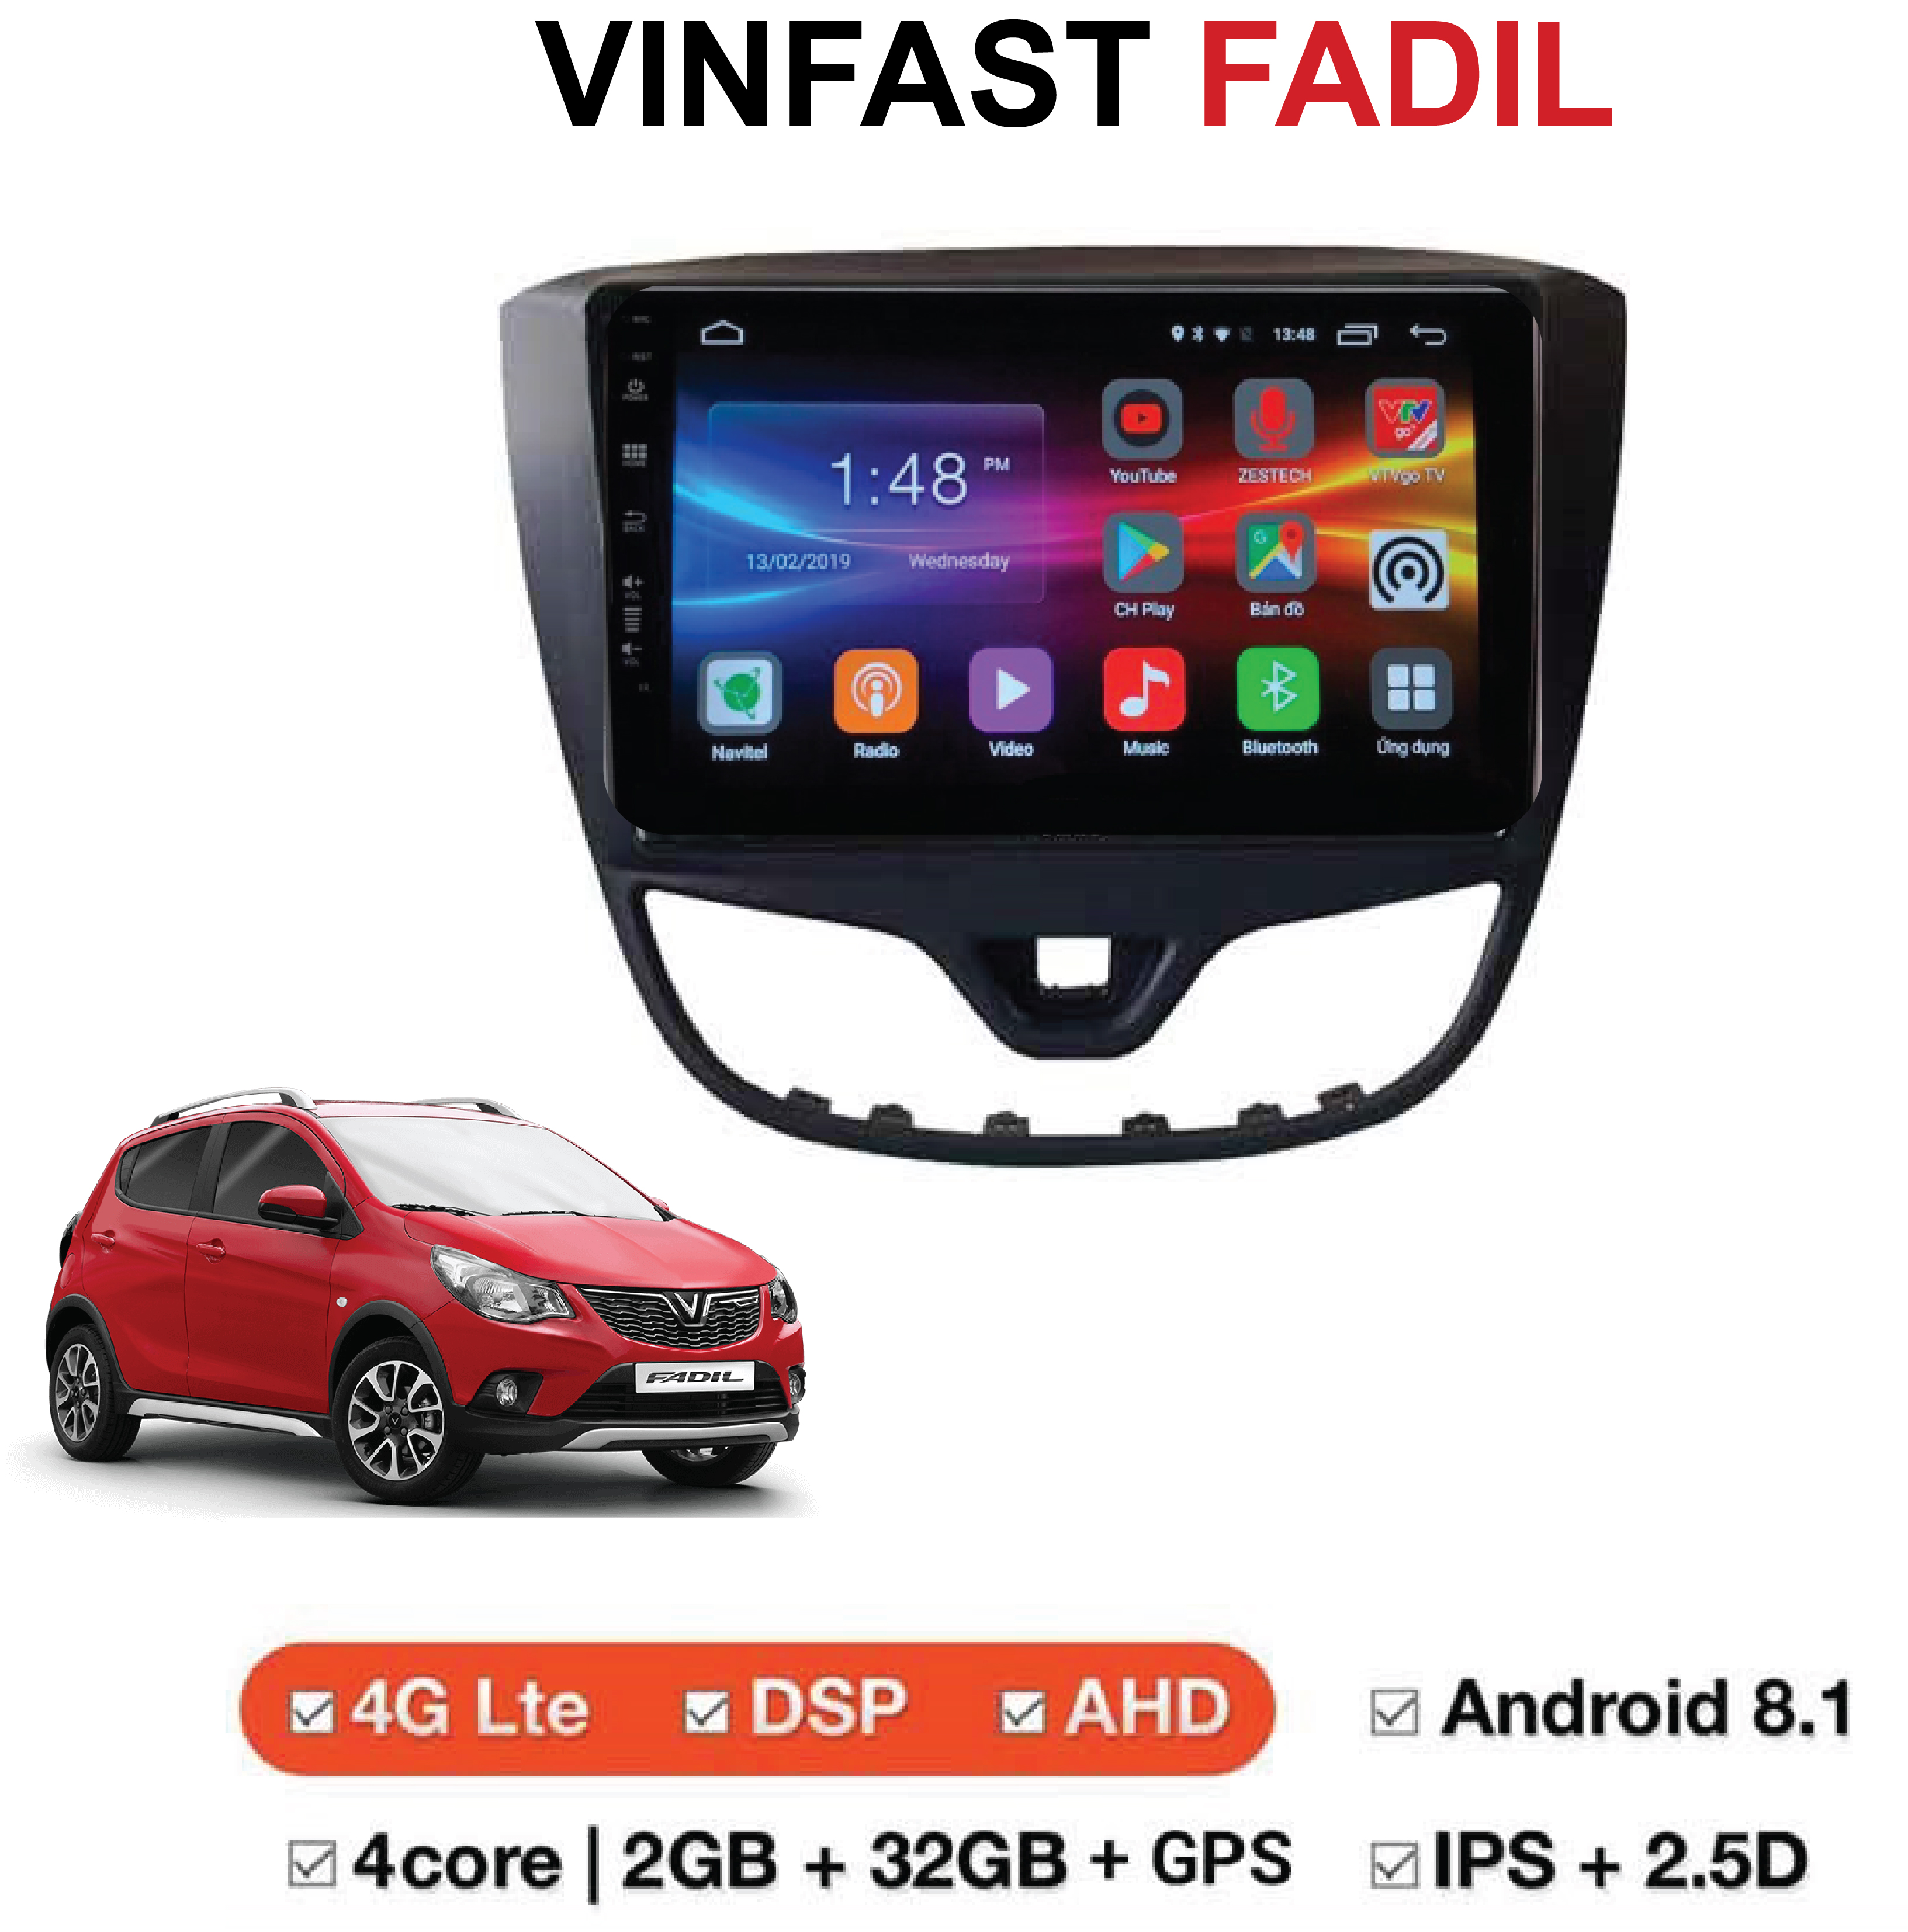 man-hinh-android-cho-xe-vinfast-fadil-4